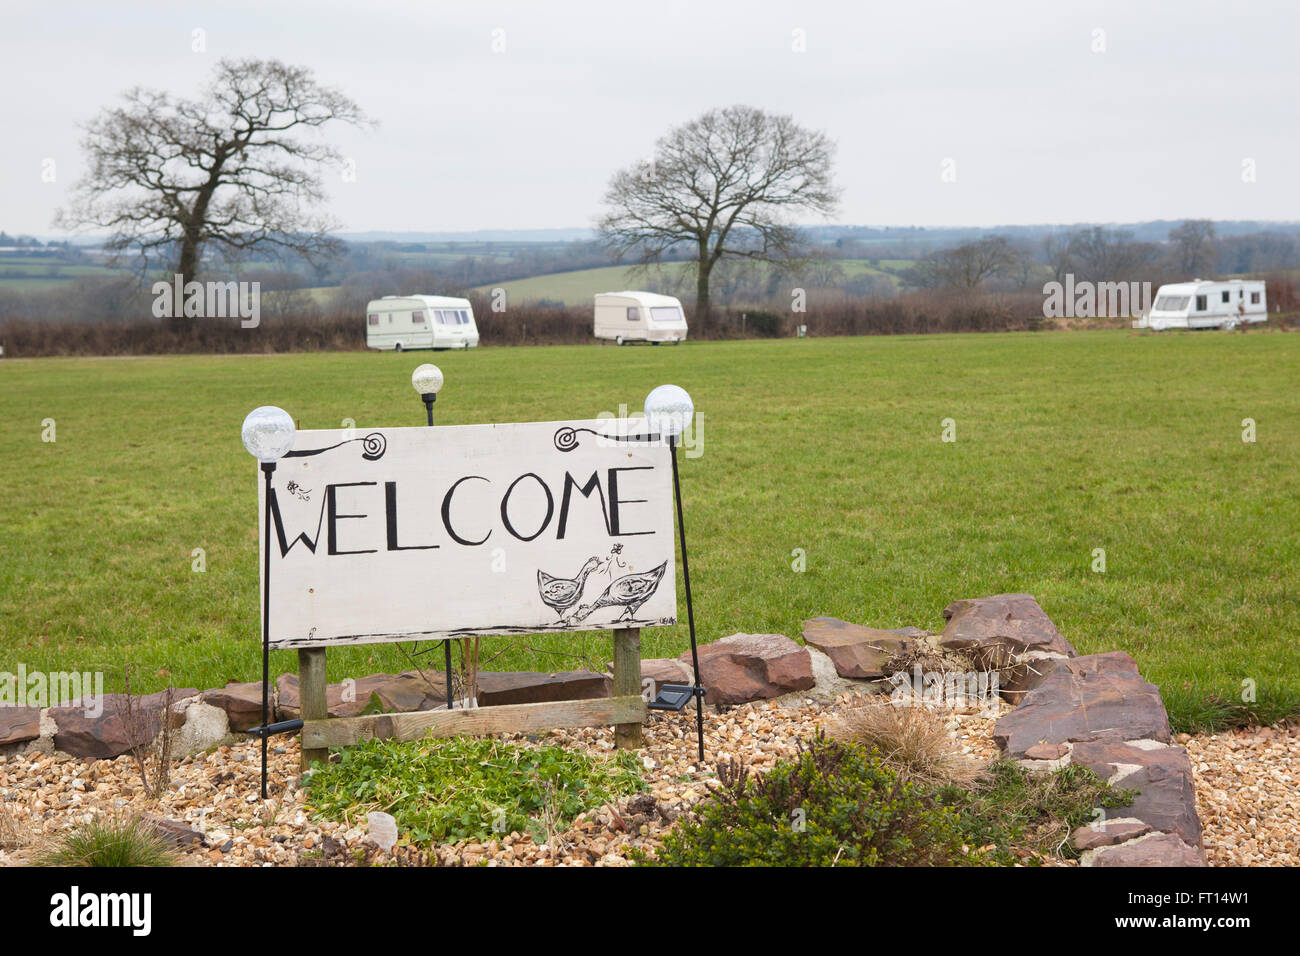 A campsite on a devon farm with caravans and a large hand painted Welcome sign in the foreground. Stock Photo